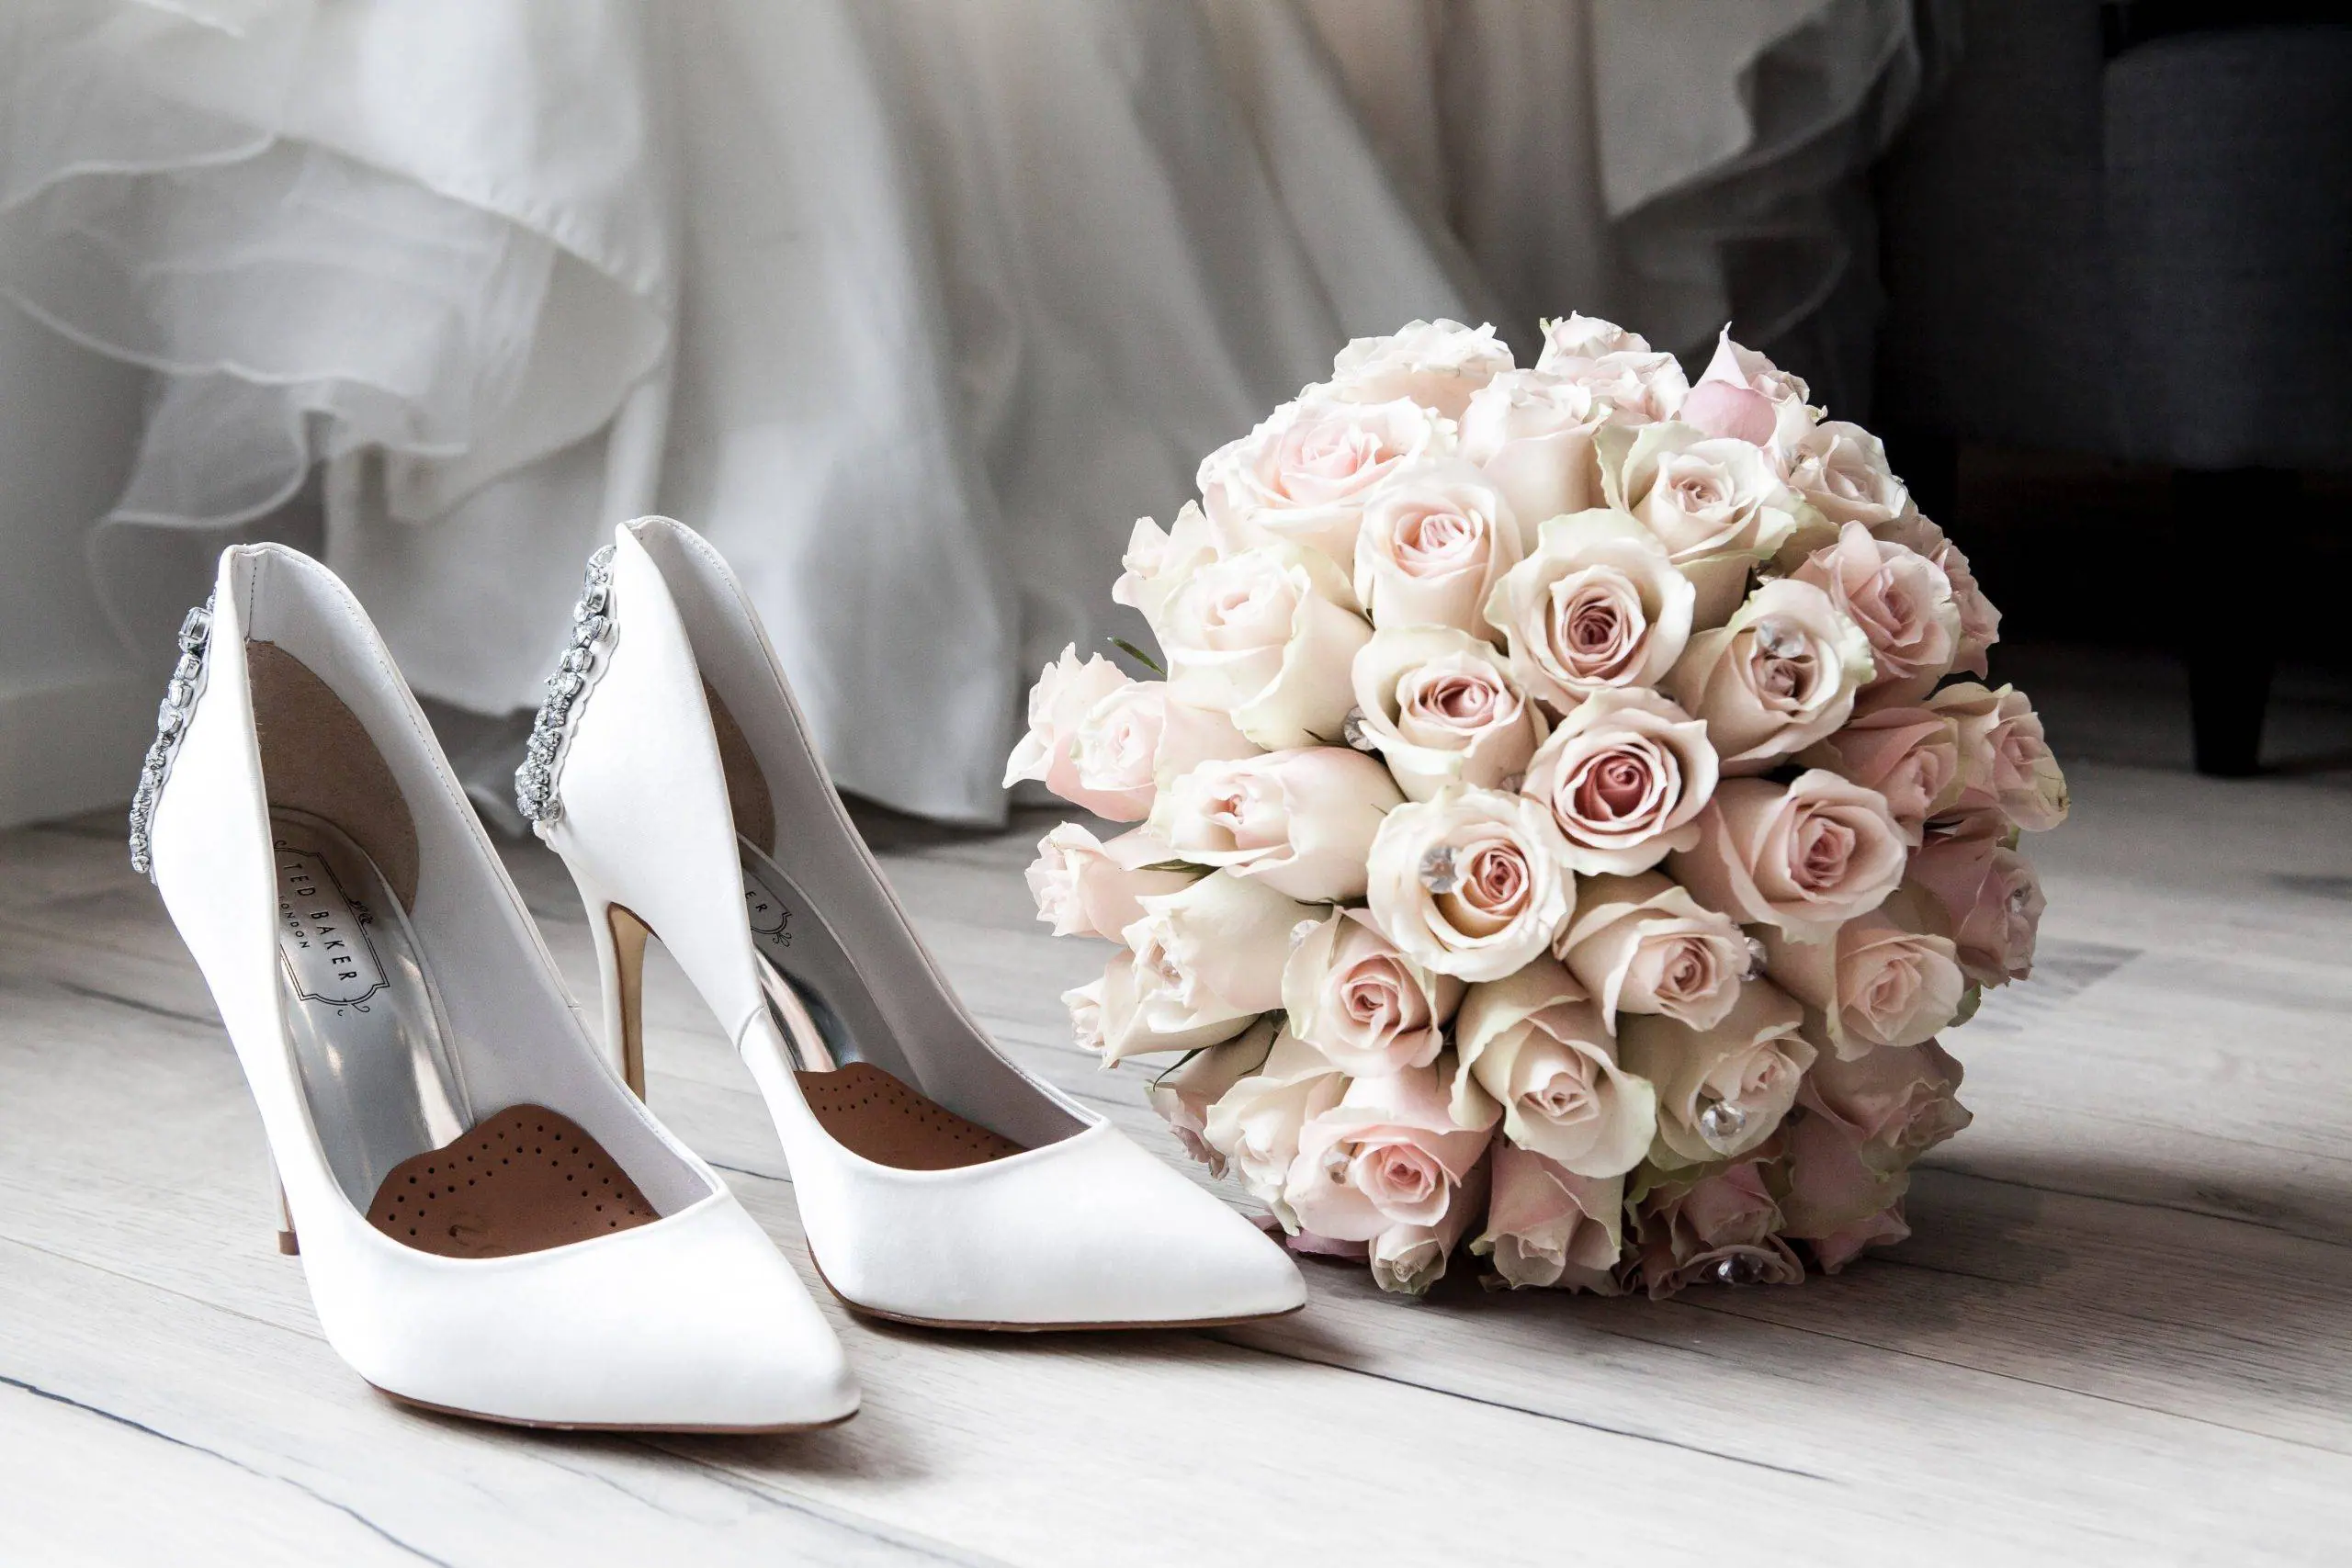 A bouquet of roses and wedding shoes on a wooden floor.